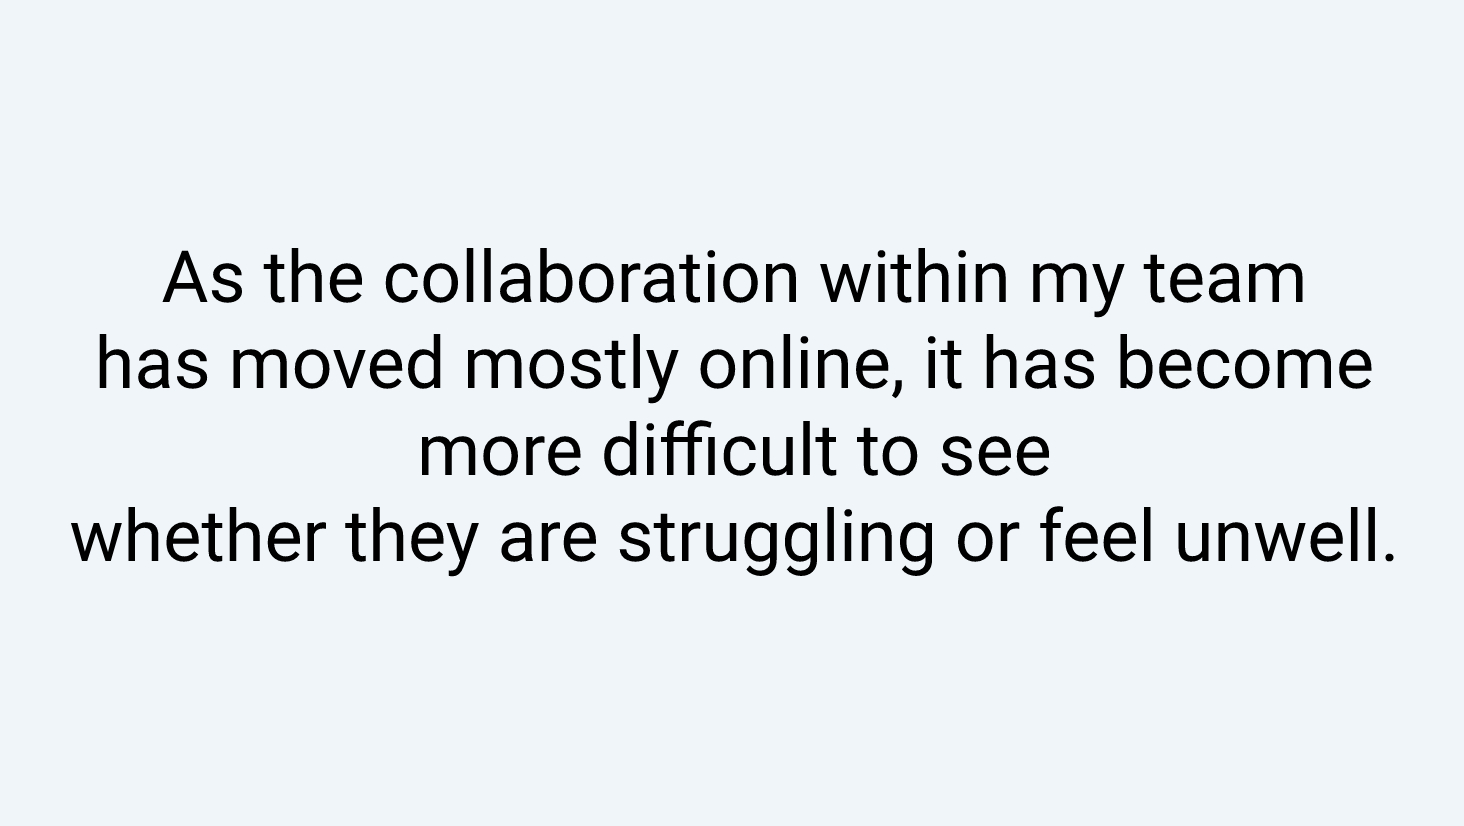 As the collaboration within my team has moved mostly online, it has become more difficult to see whether they are struggling or feel unwell.